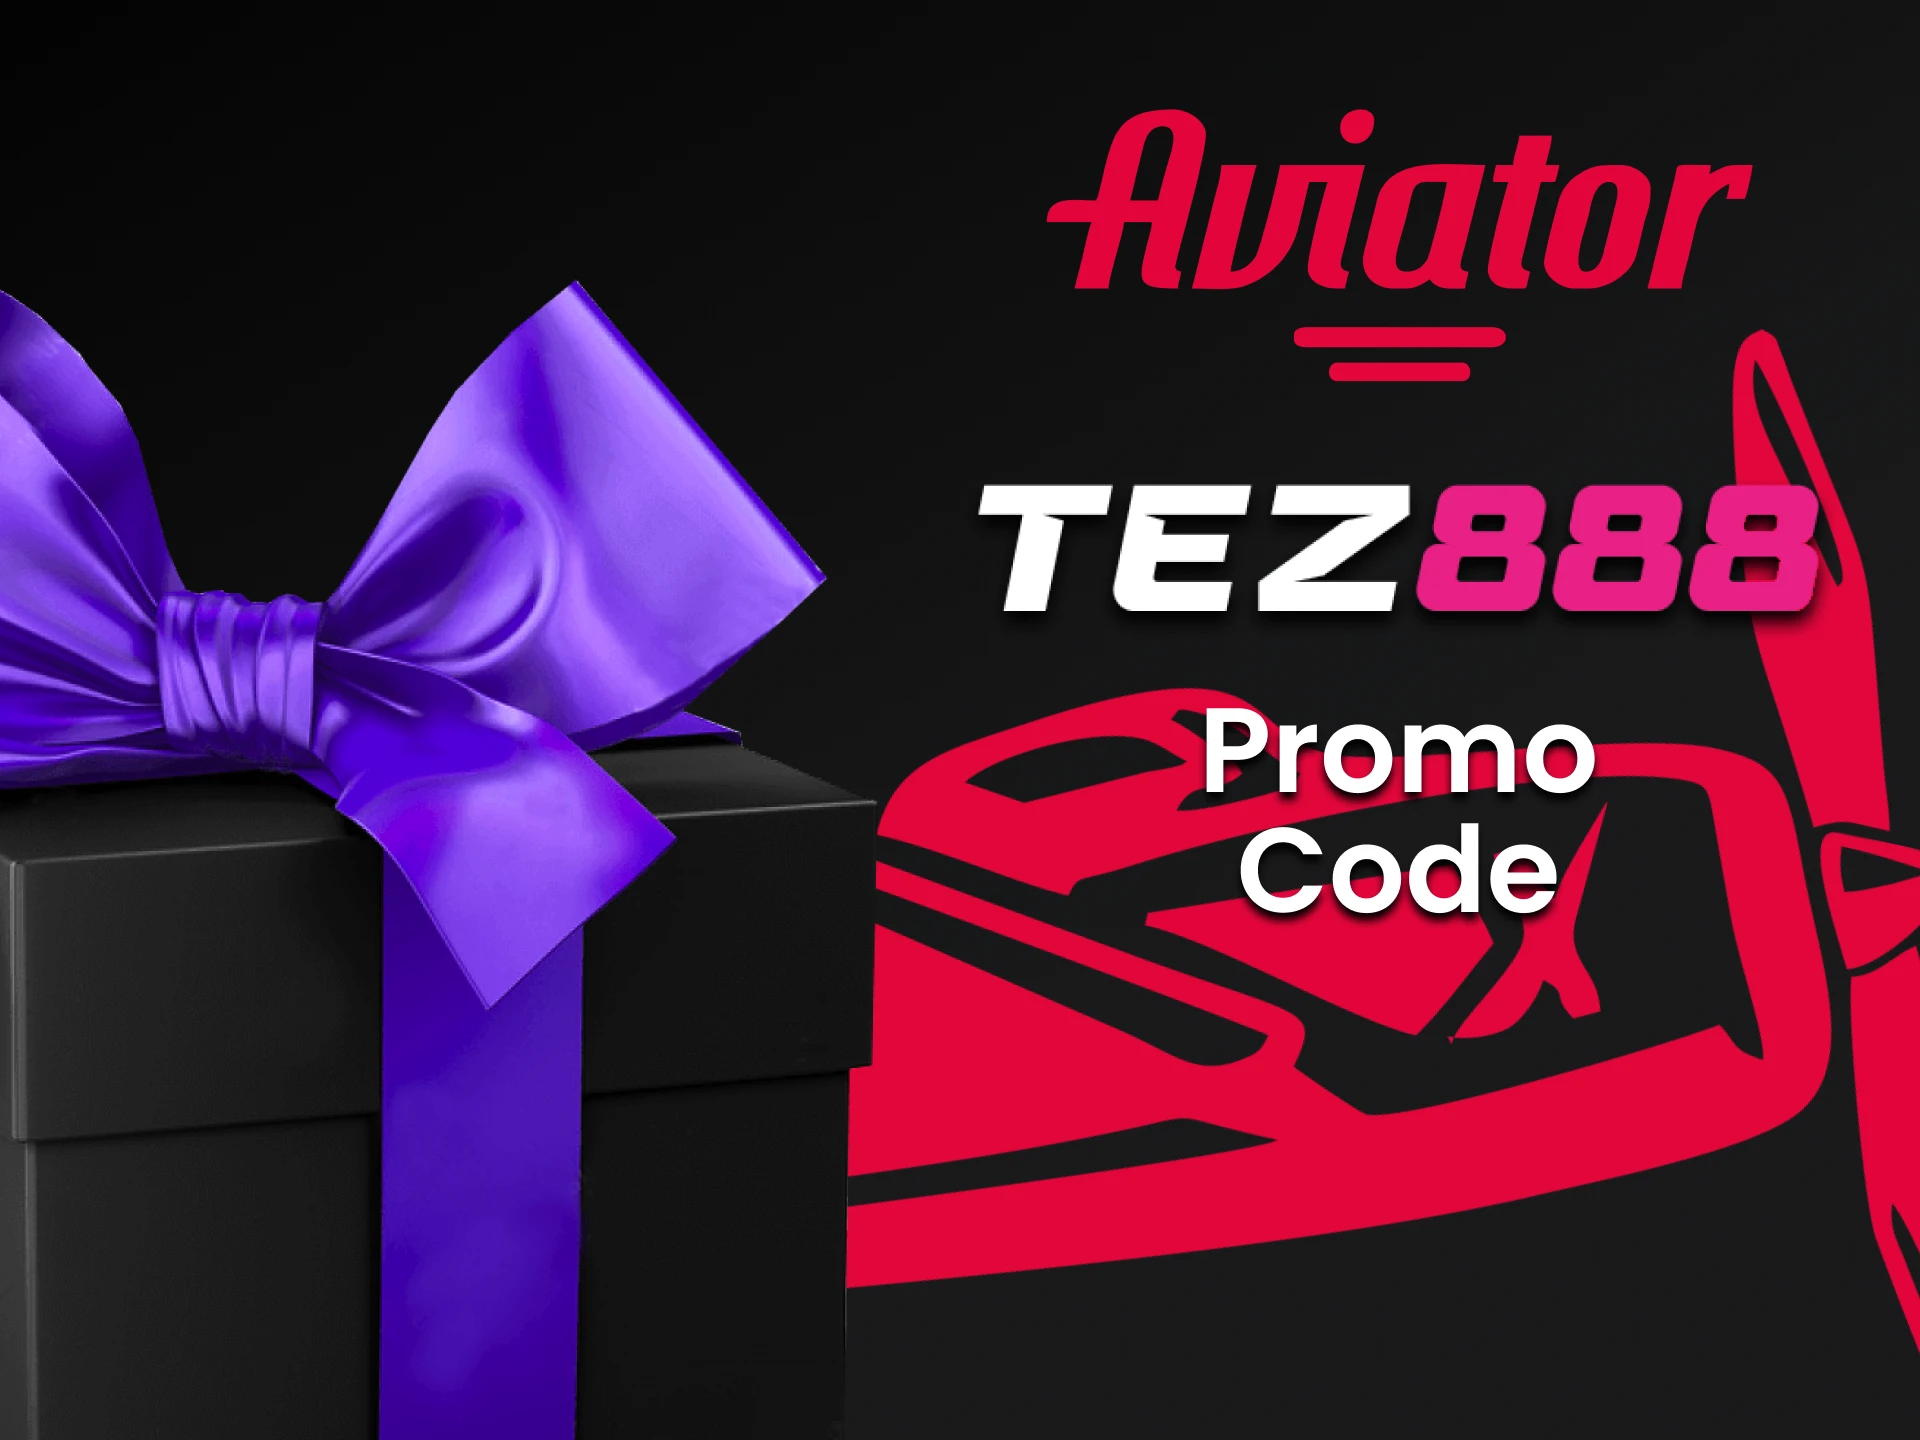 Use the promotional code in the Tez888 application to receive the Aviator game bonus.